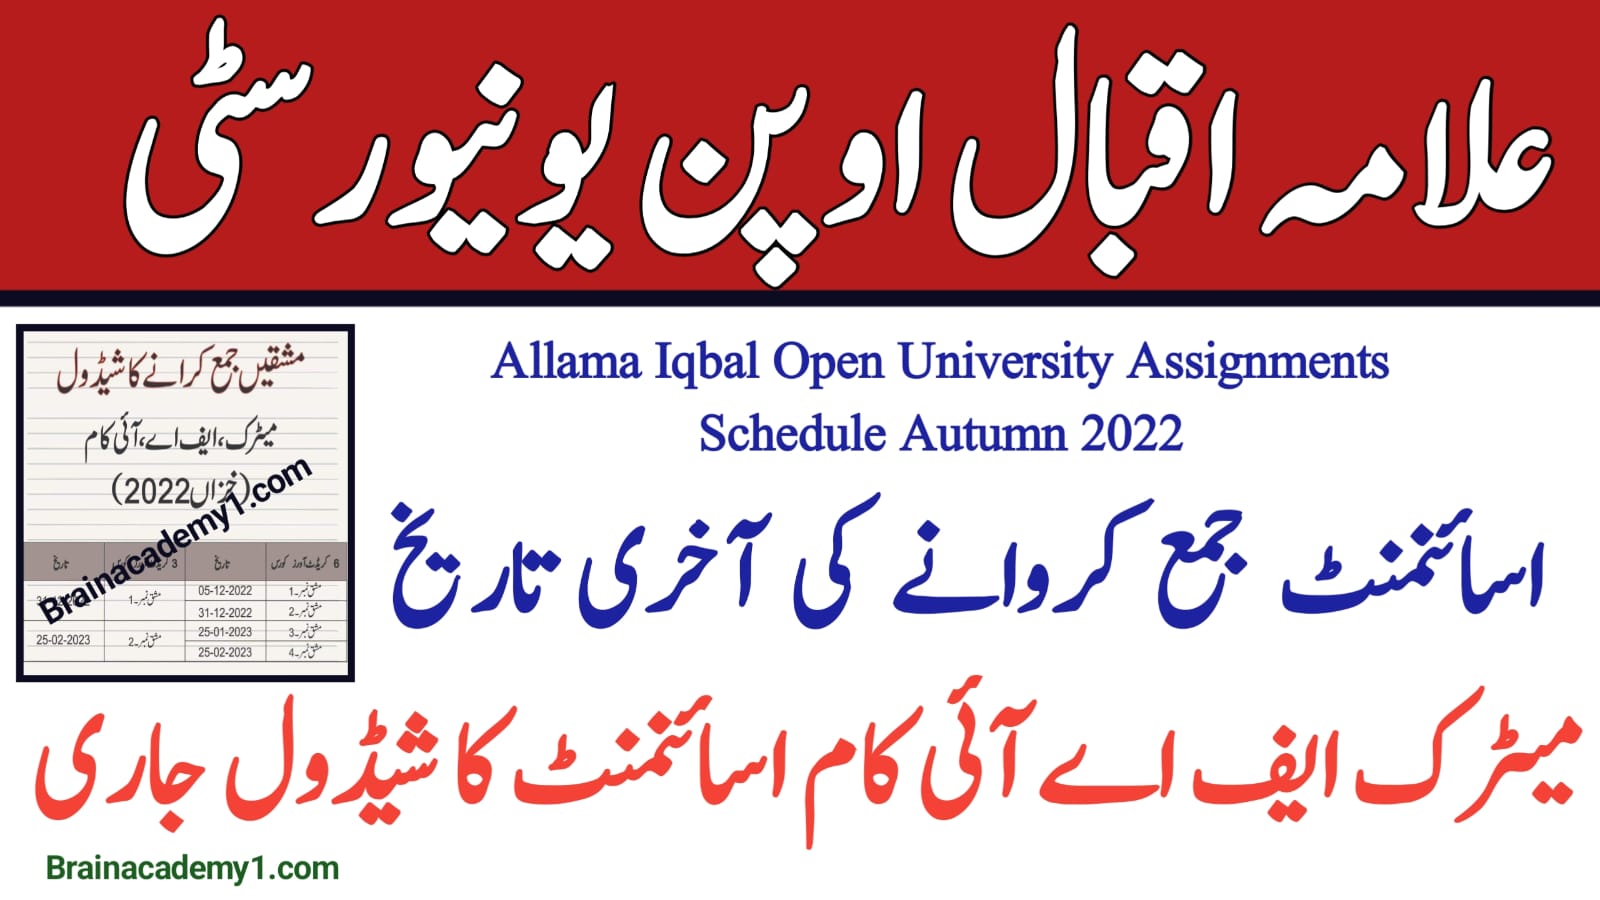 last date of aiou assignment 2022